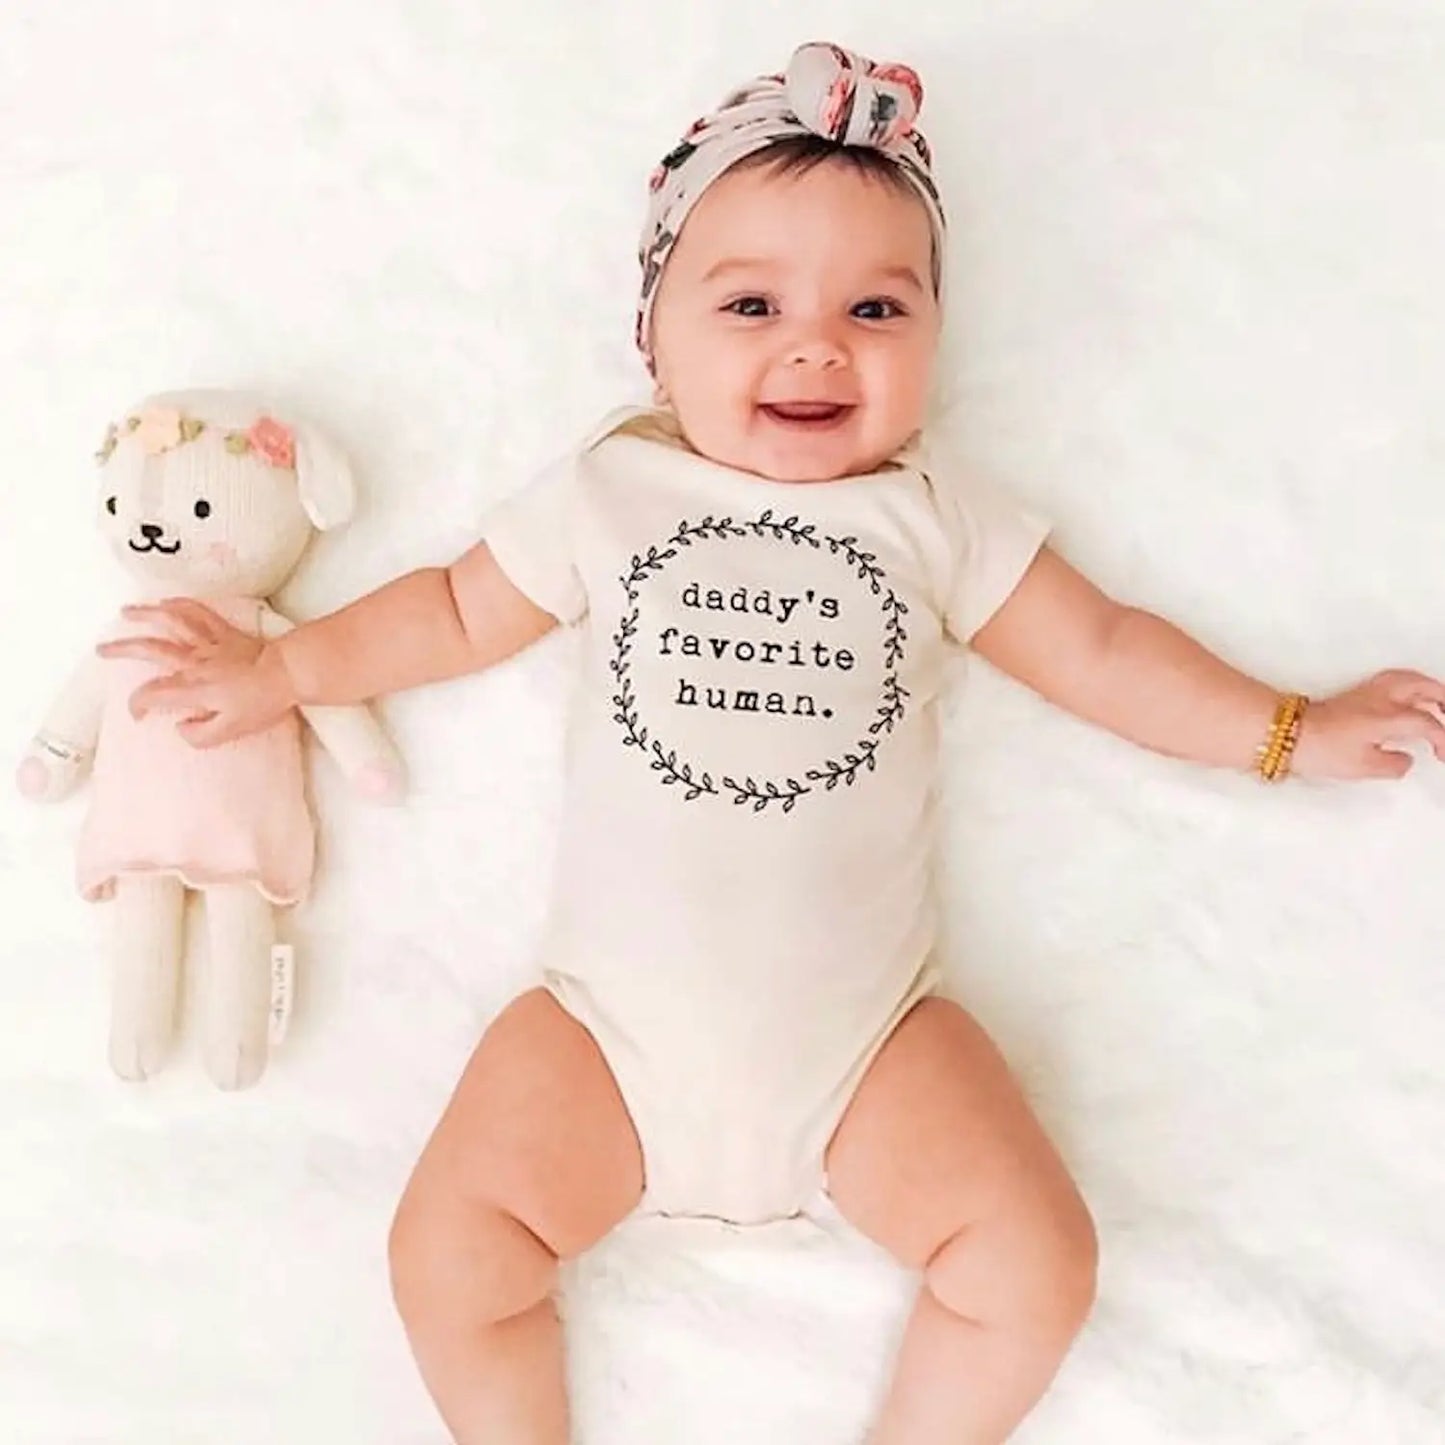 Cute Baby Wearing the Daddy's Favorite Human Organic Cotton Onesie